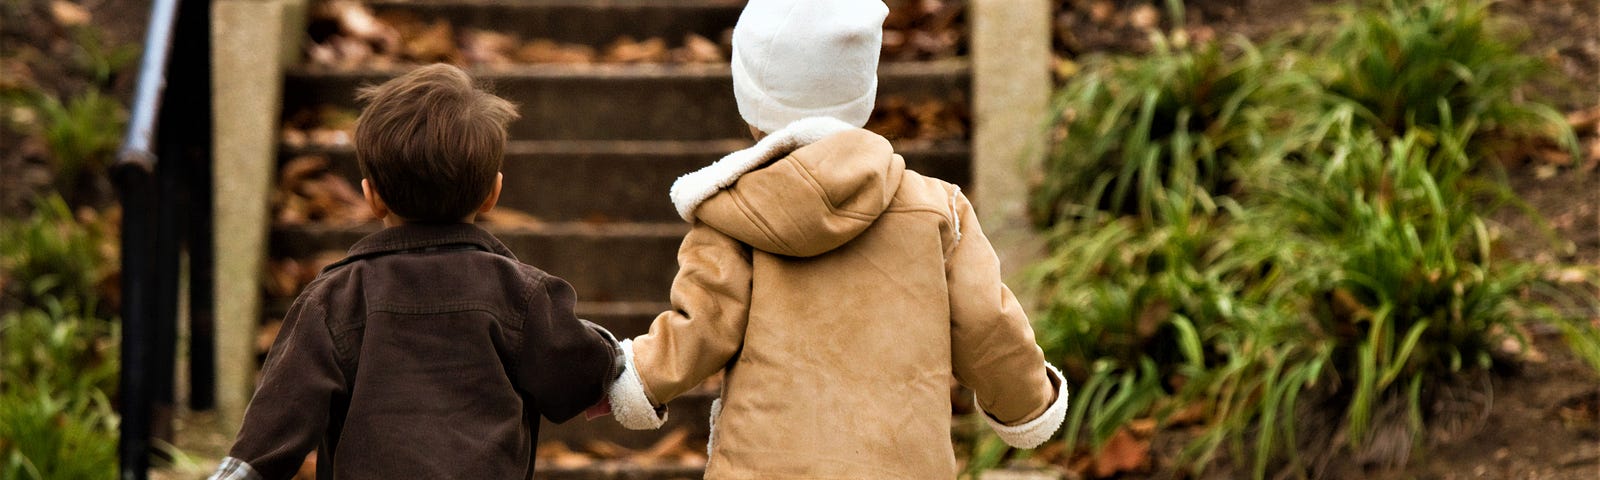 Back view of young boy and girl holding hands and walking toward staircase